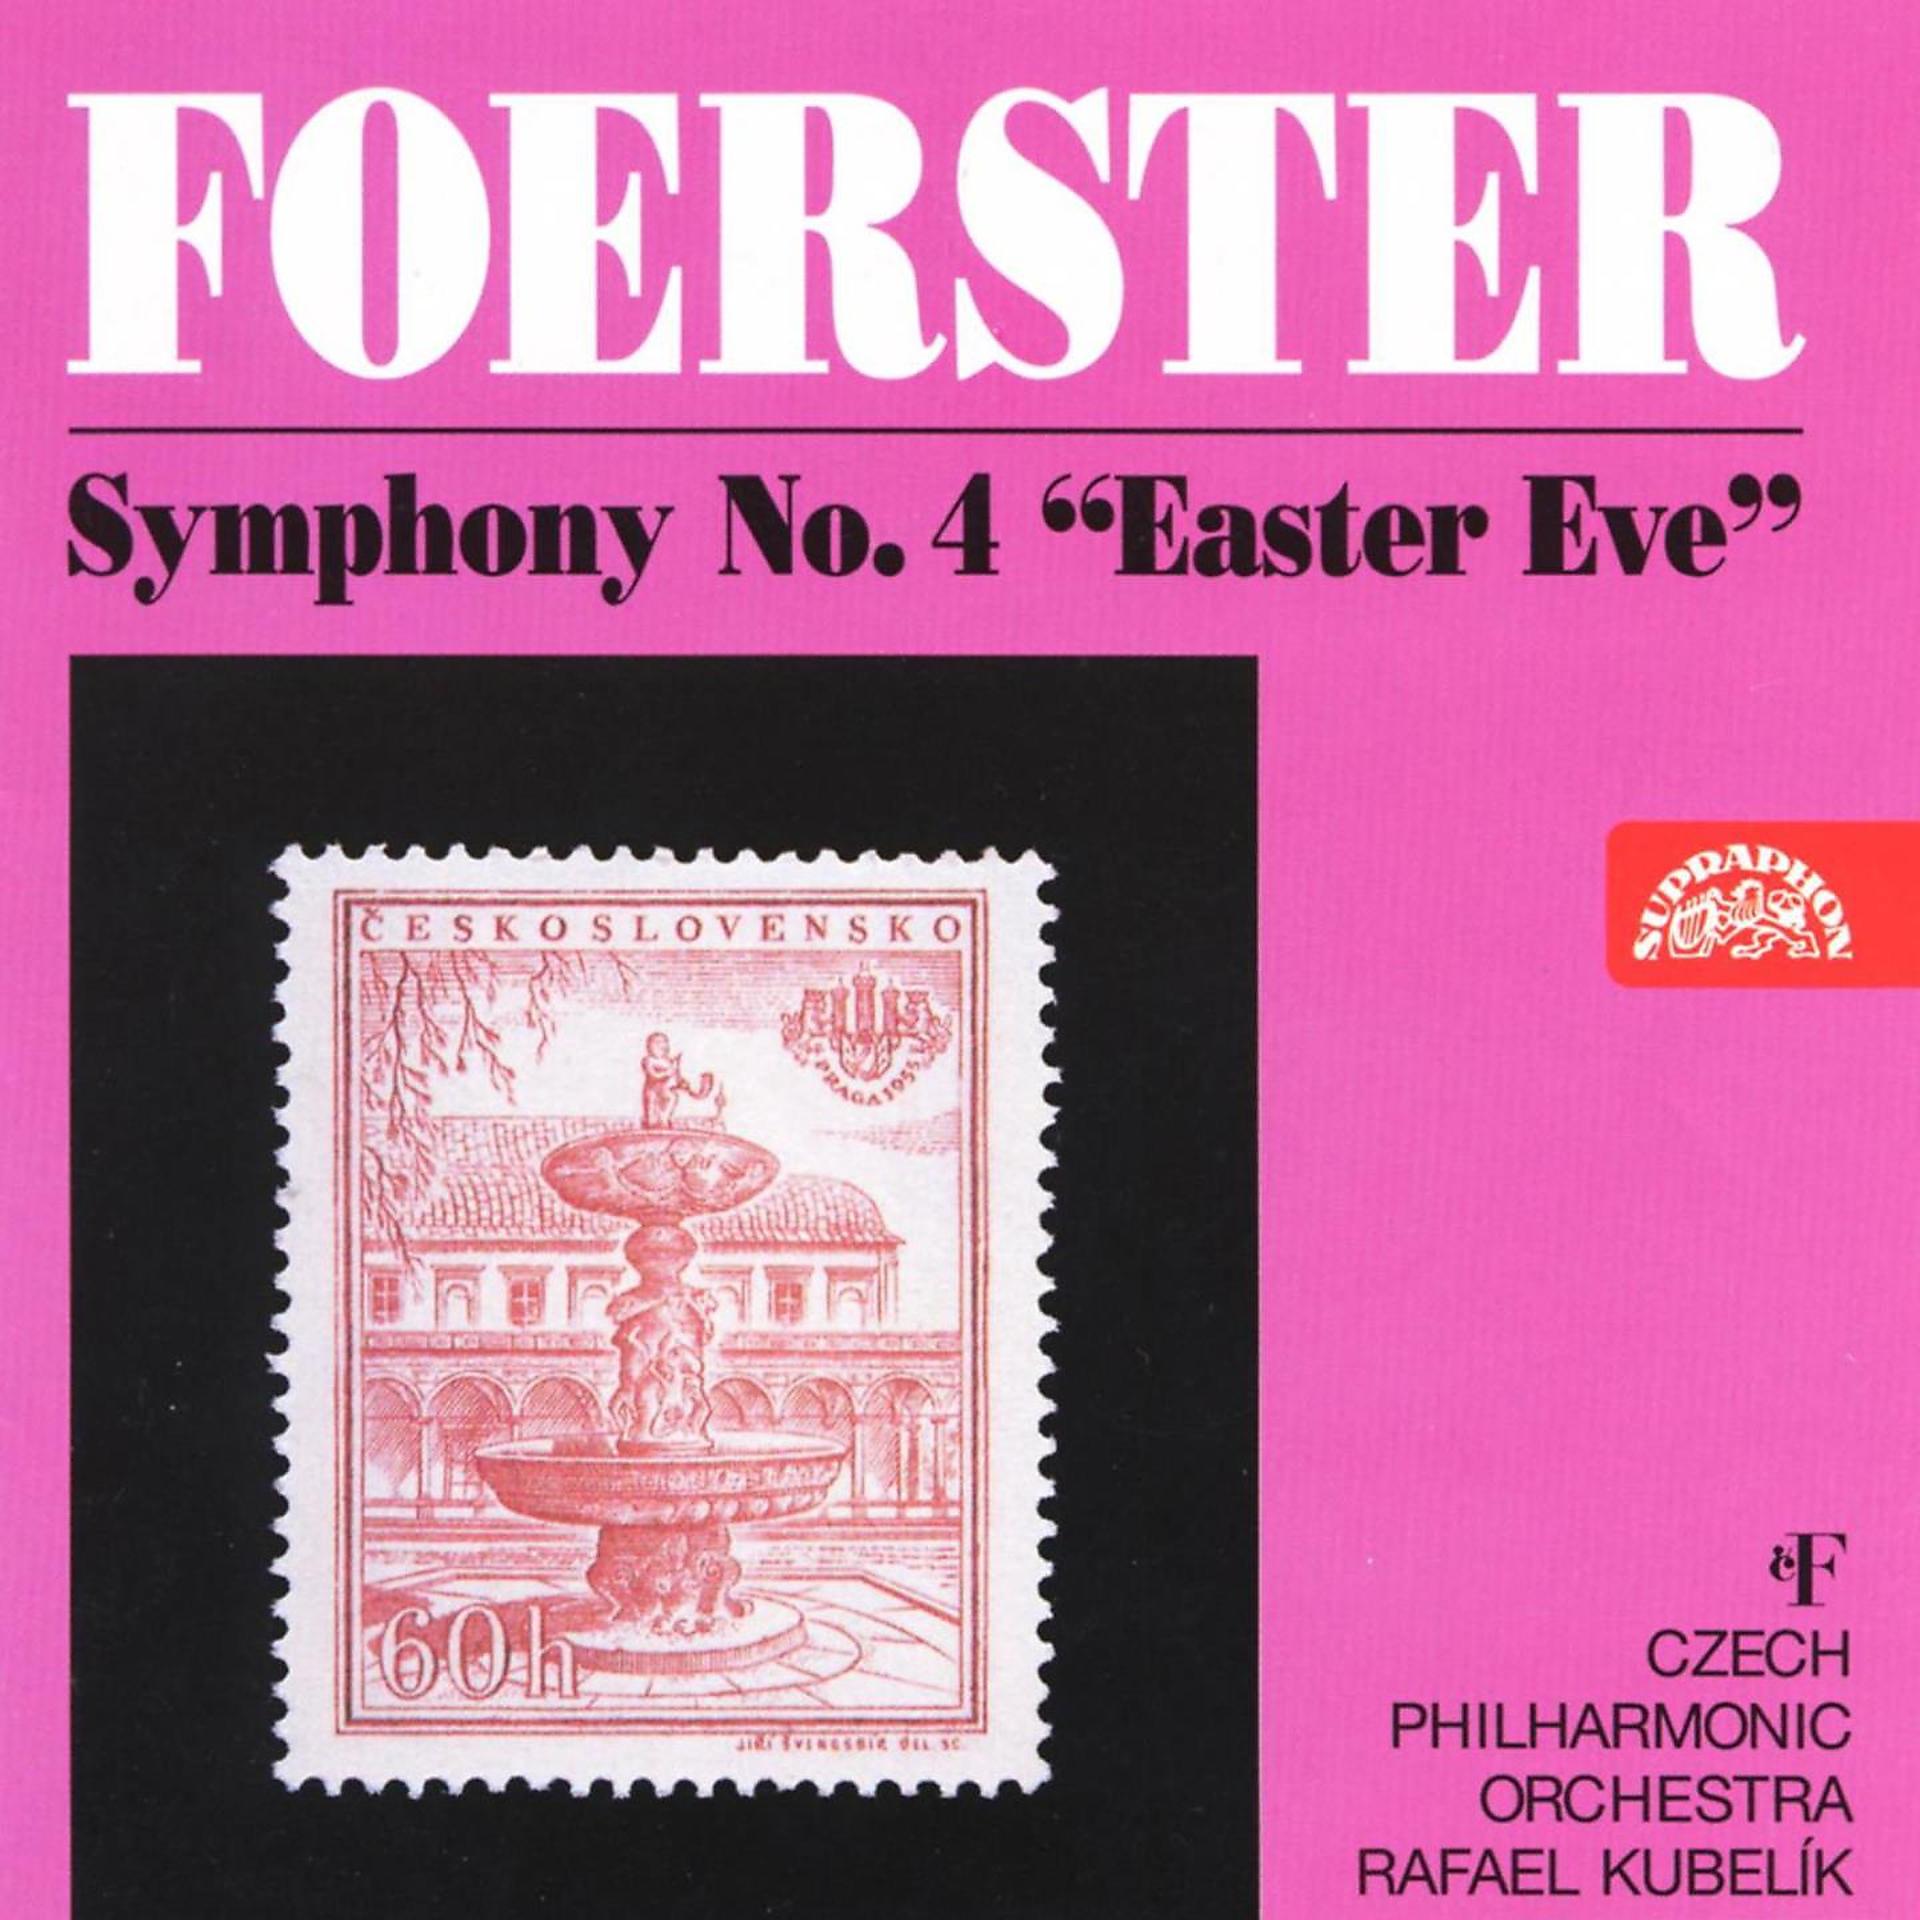 Постер альбома Foerster: Symphony No. 4 in C Minor "Easter Eve"